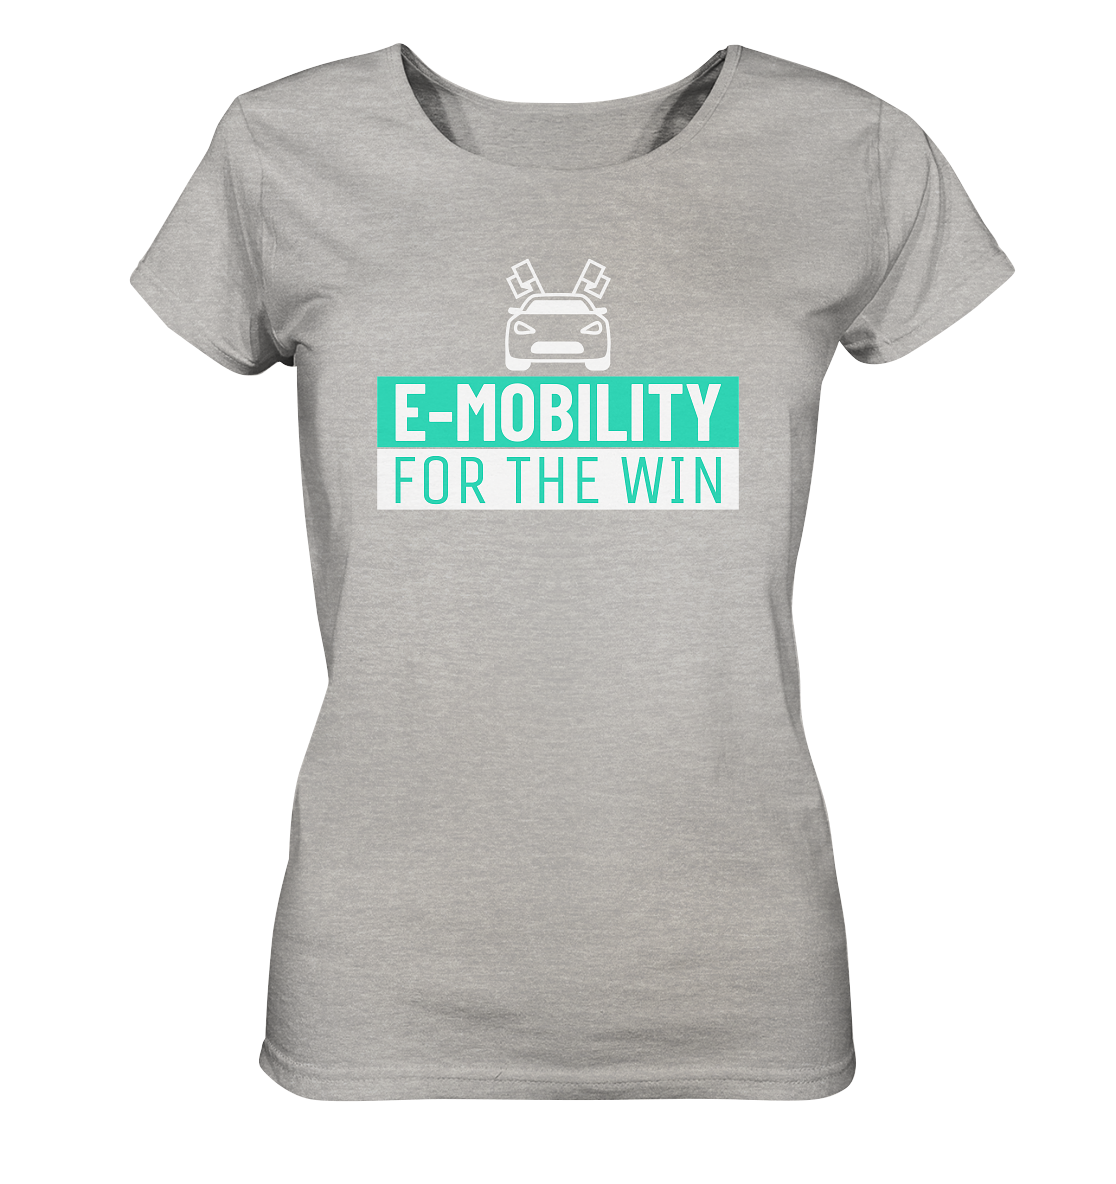 E-Mobility for the win ORGANIC - Ladies Organic Shirt (meliert)